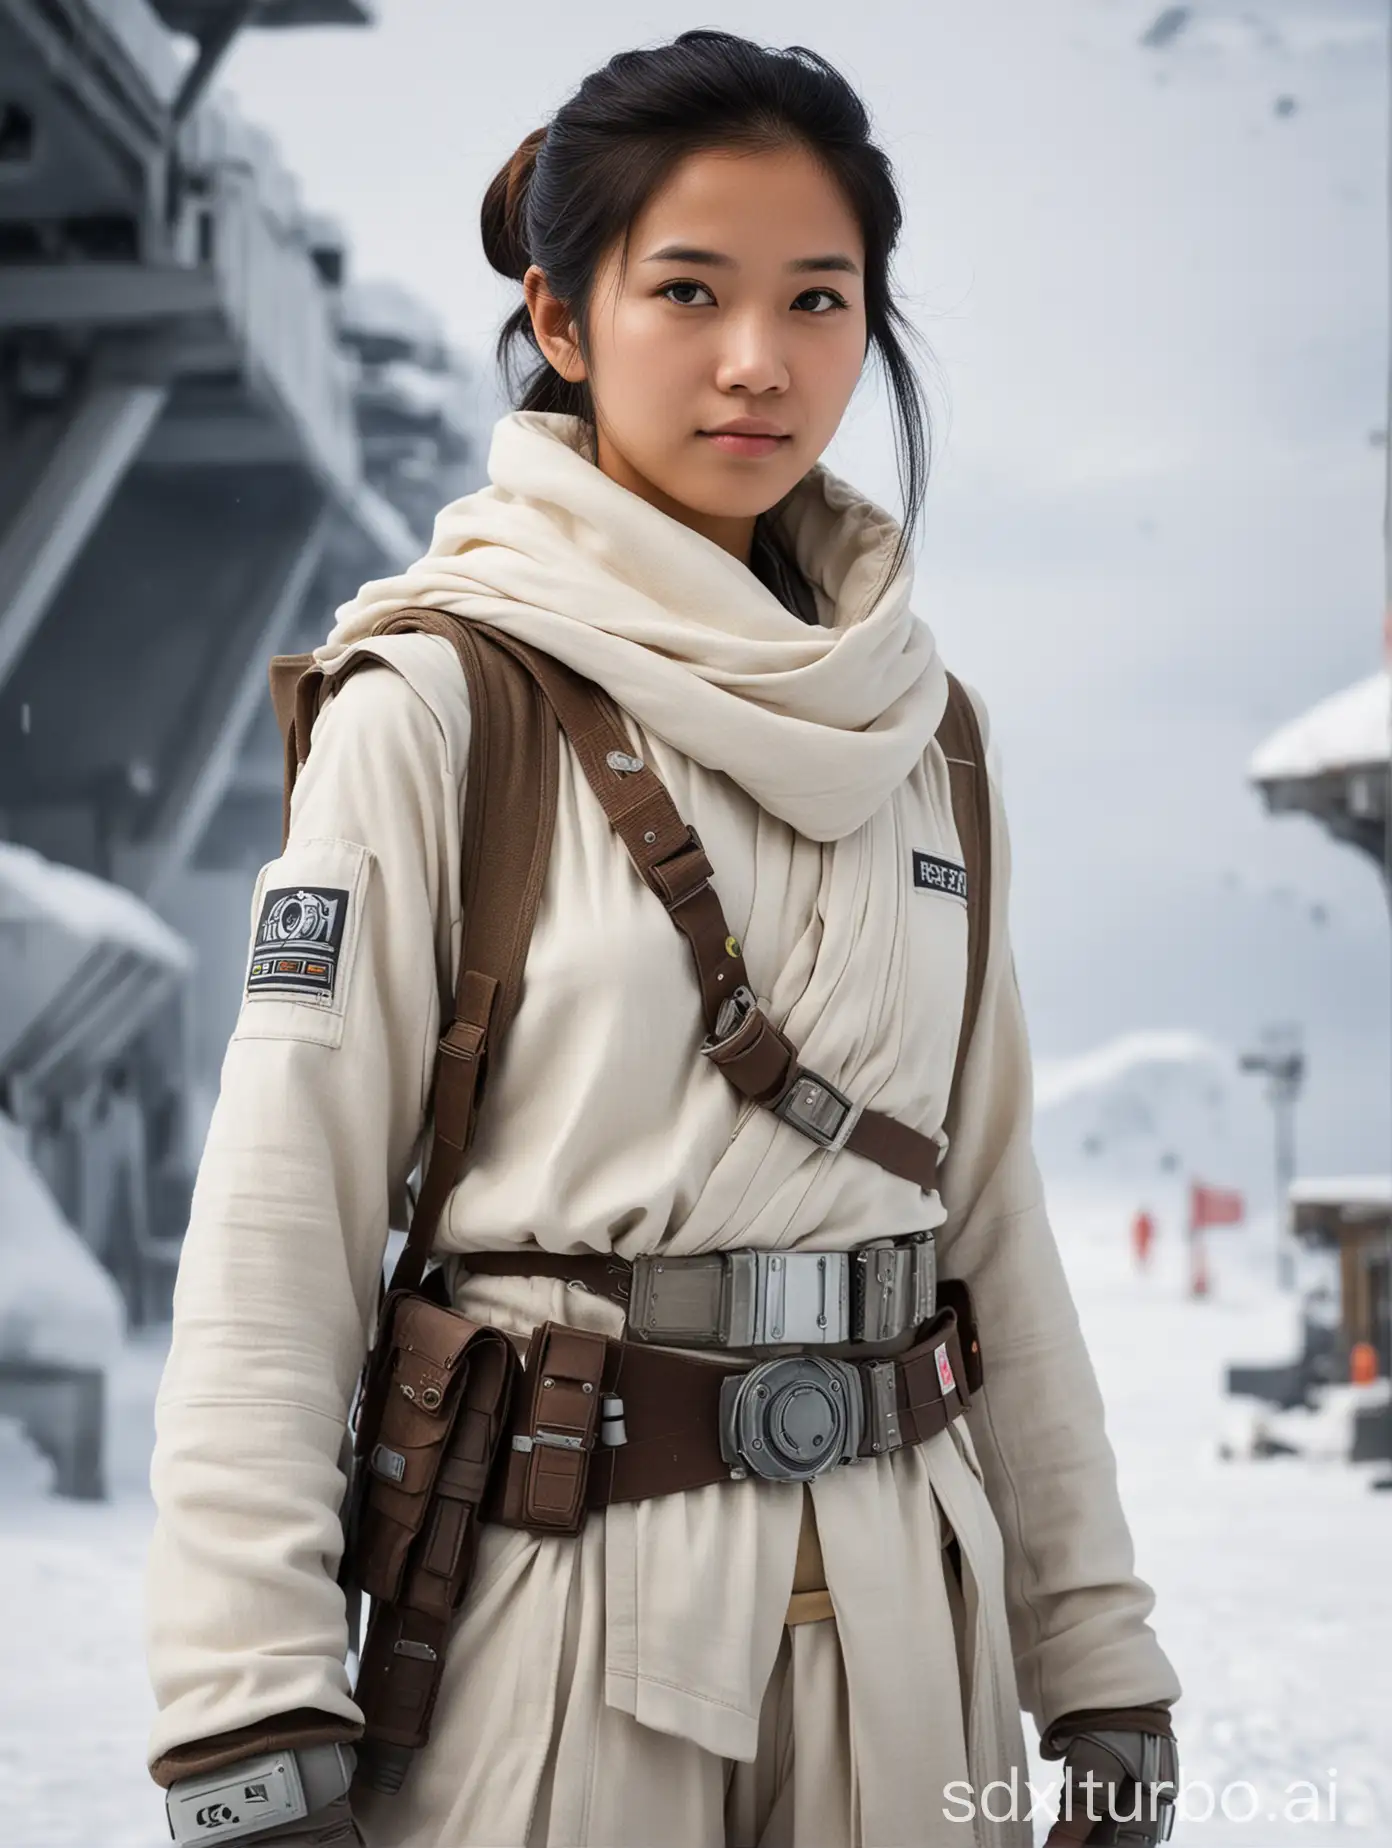 jedi girl, age 16, southeast Asian, Hoth spaceport